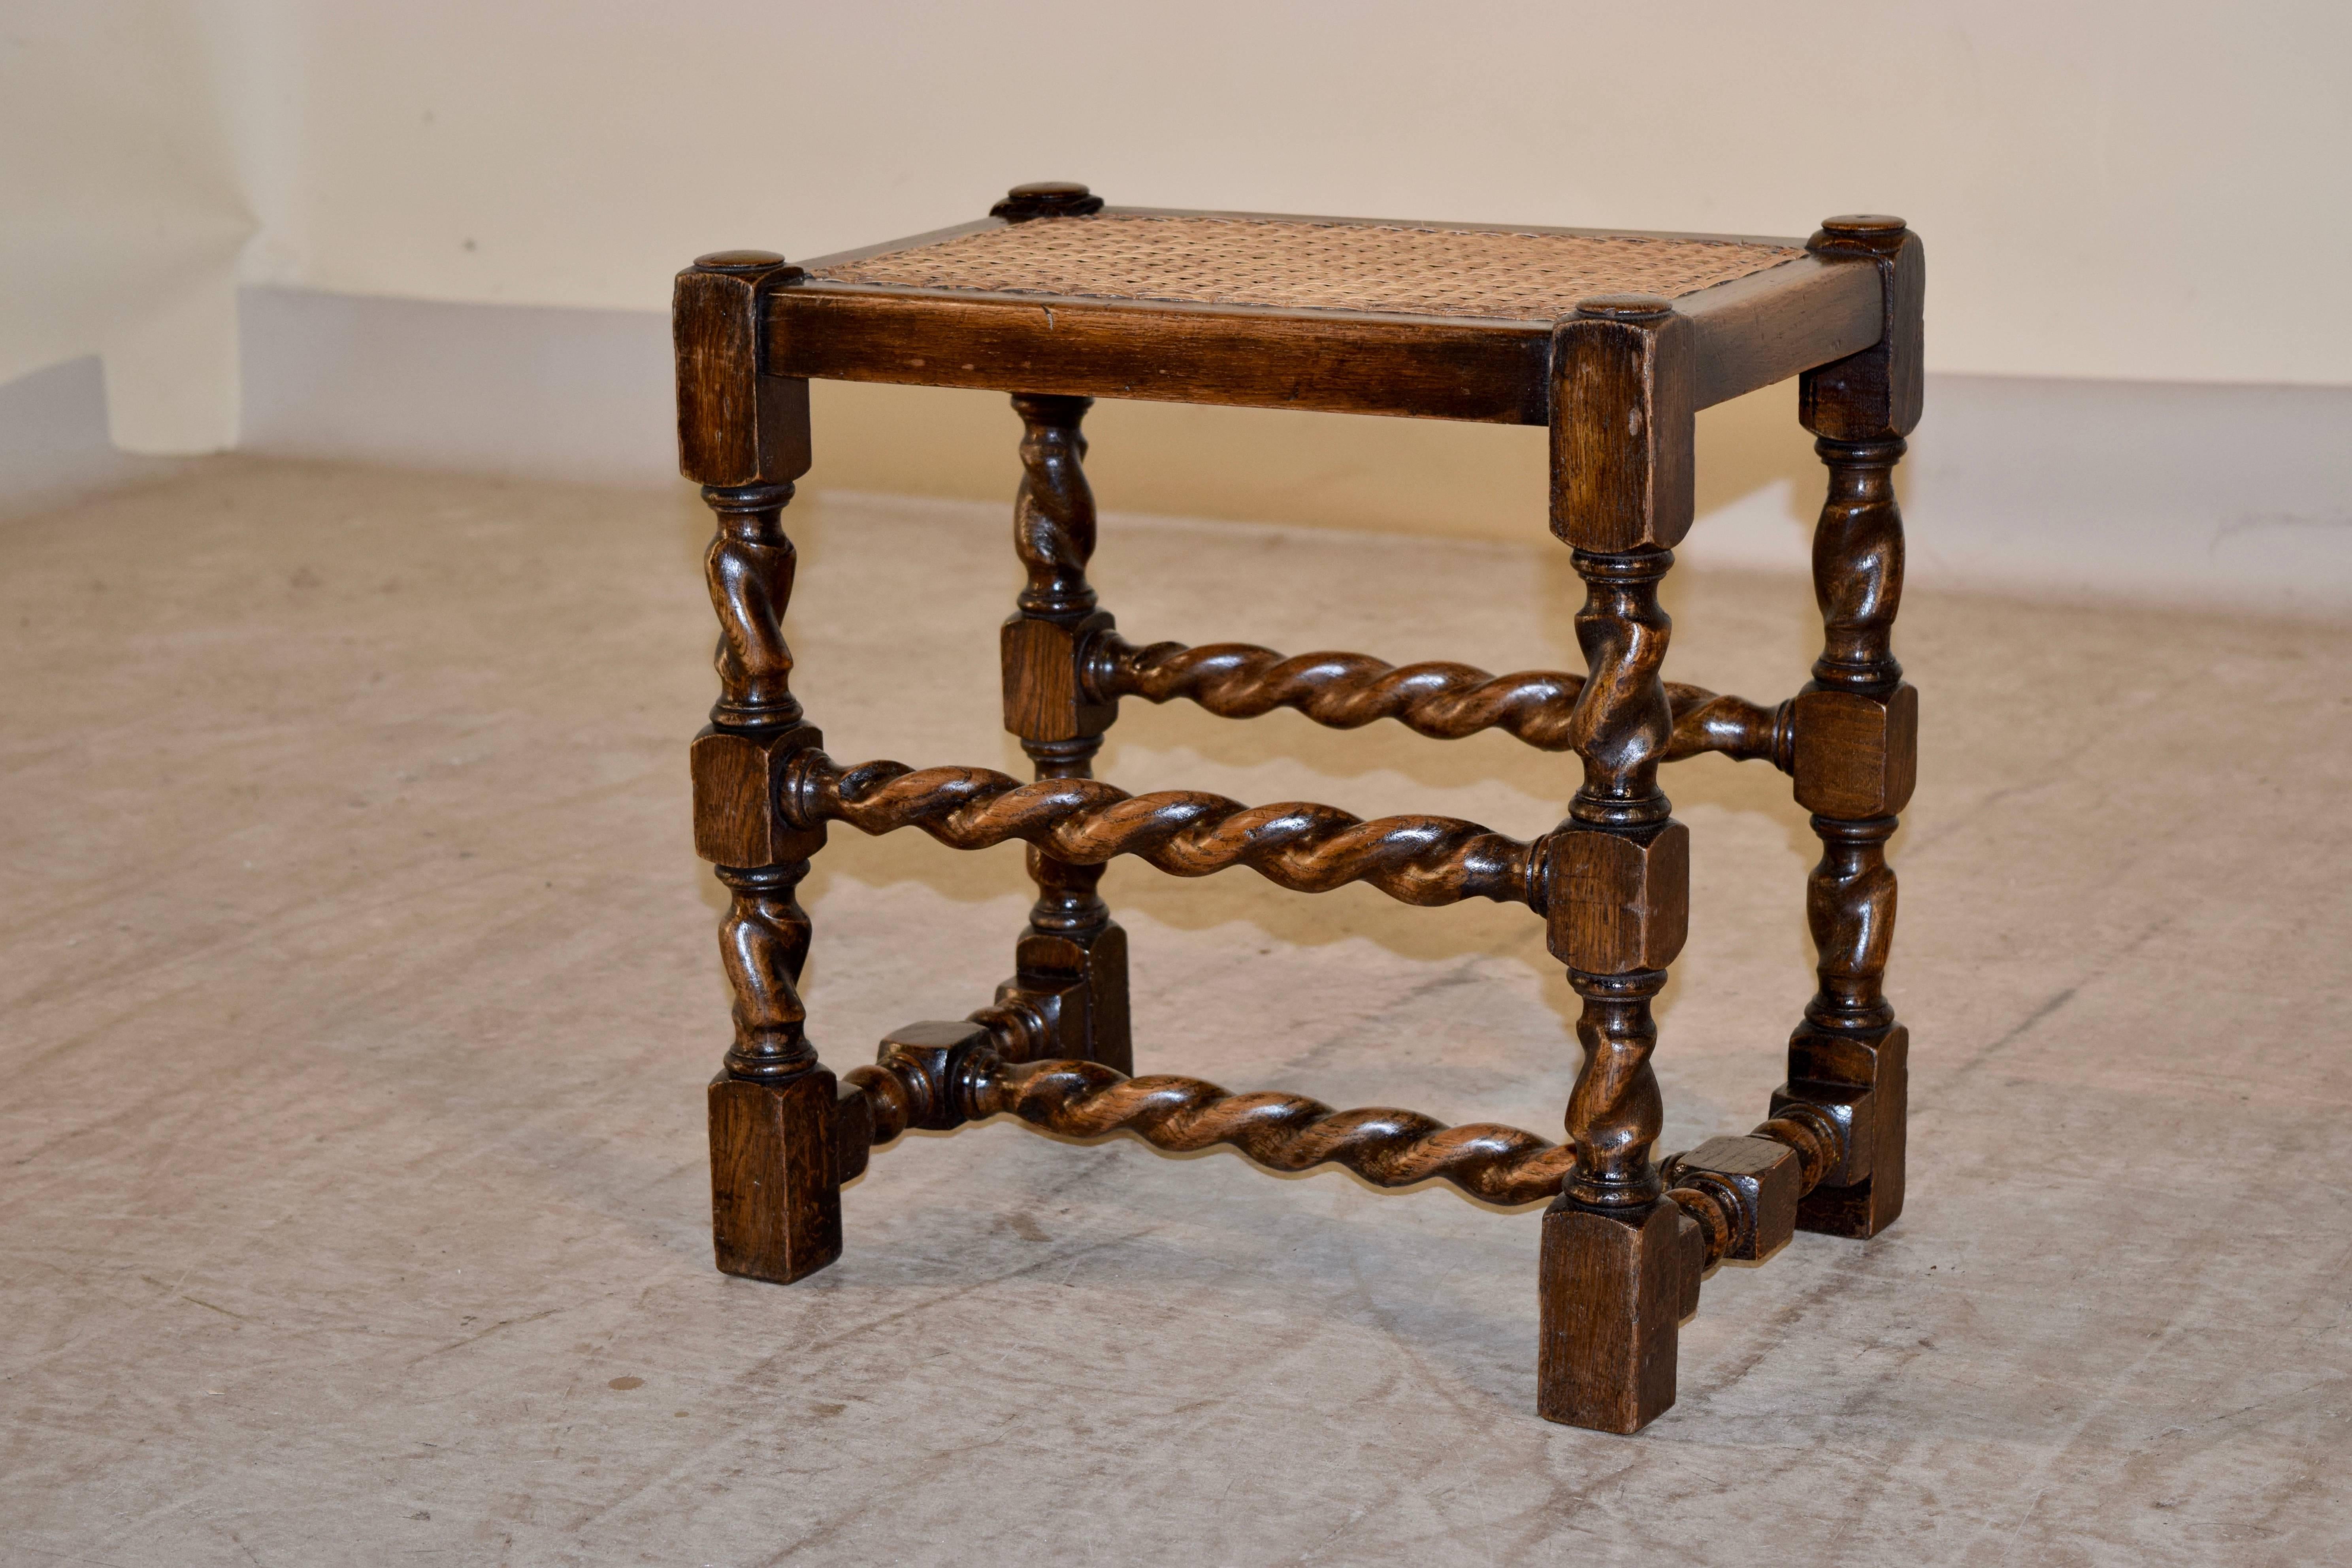 19th century English oak stool with hand-turned barley twist legs and stretchers and a woven cane top.